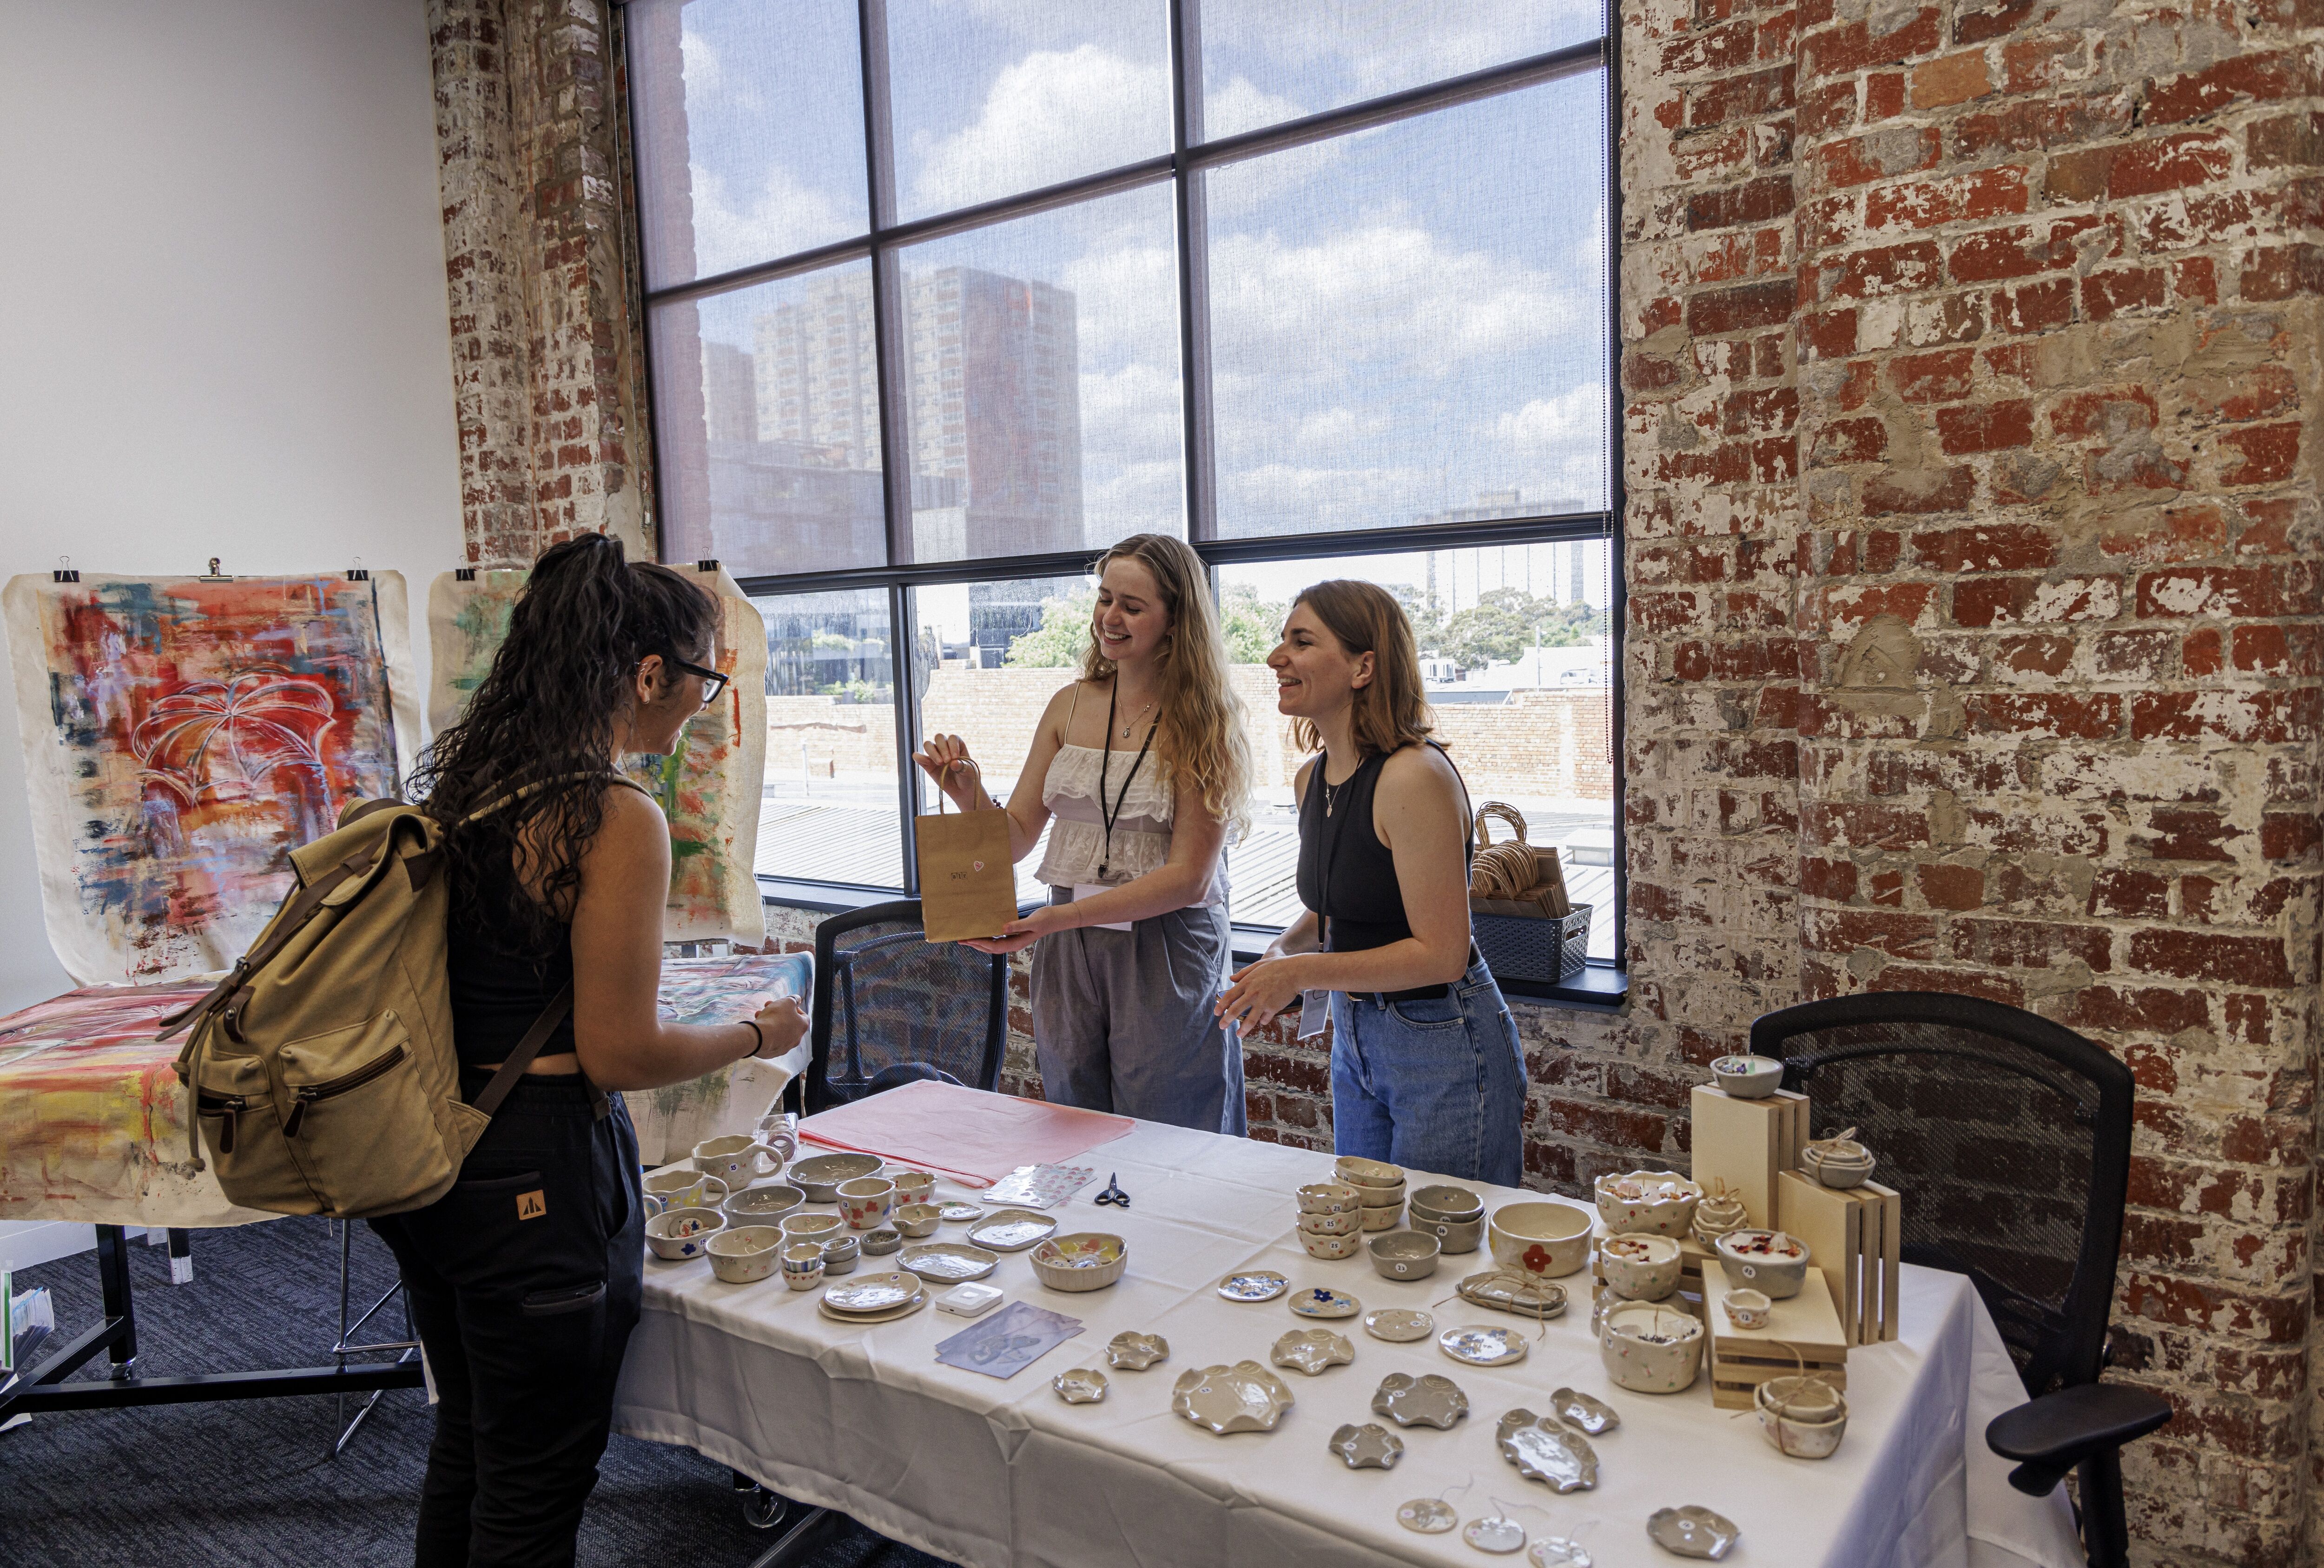 Three women engage at a pottery stall inside a room with large windows and exposed brick, artworks and ceramic wares on display.